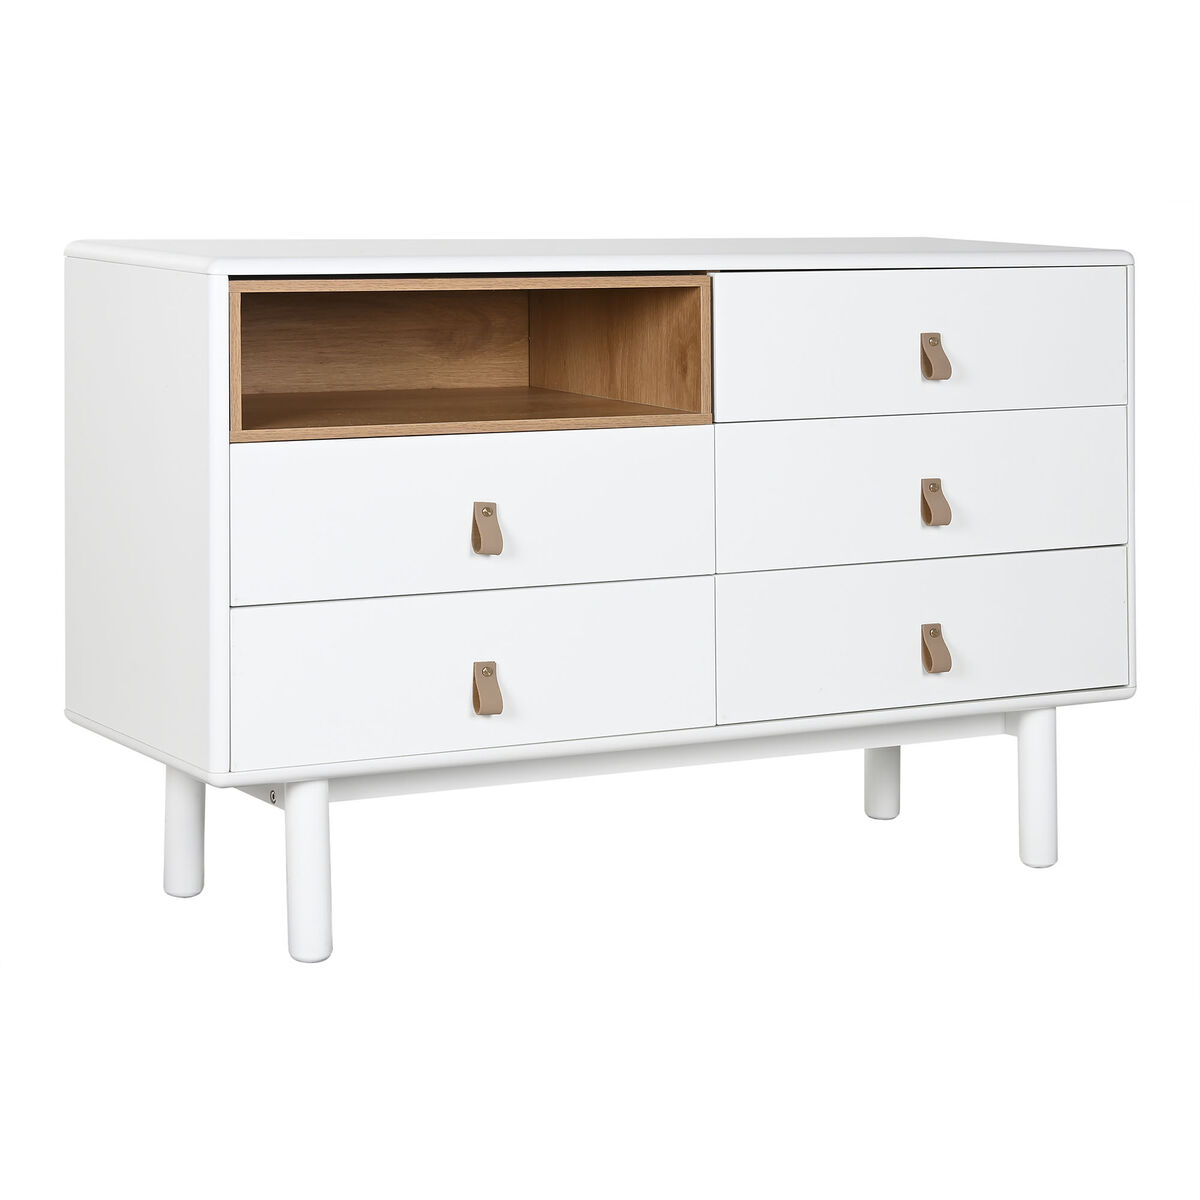 Chest of drawers Home ESPRIT White Natural polypropylene MDF Wood 120 x 40 x 75 cm